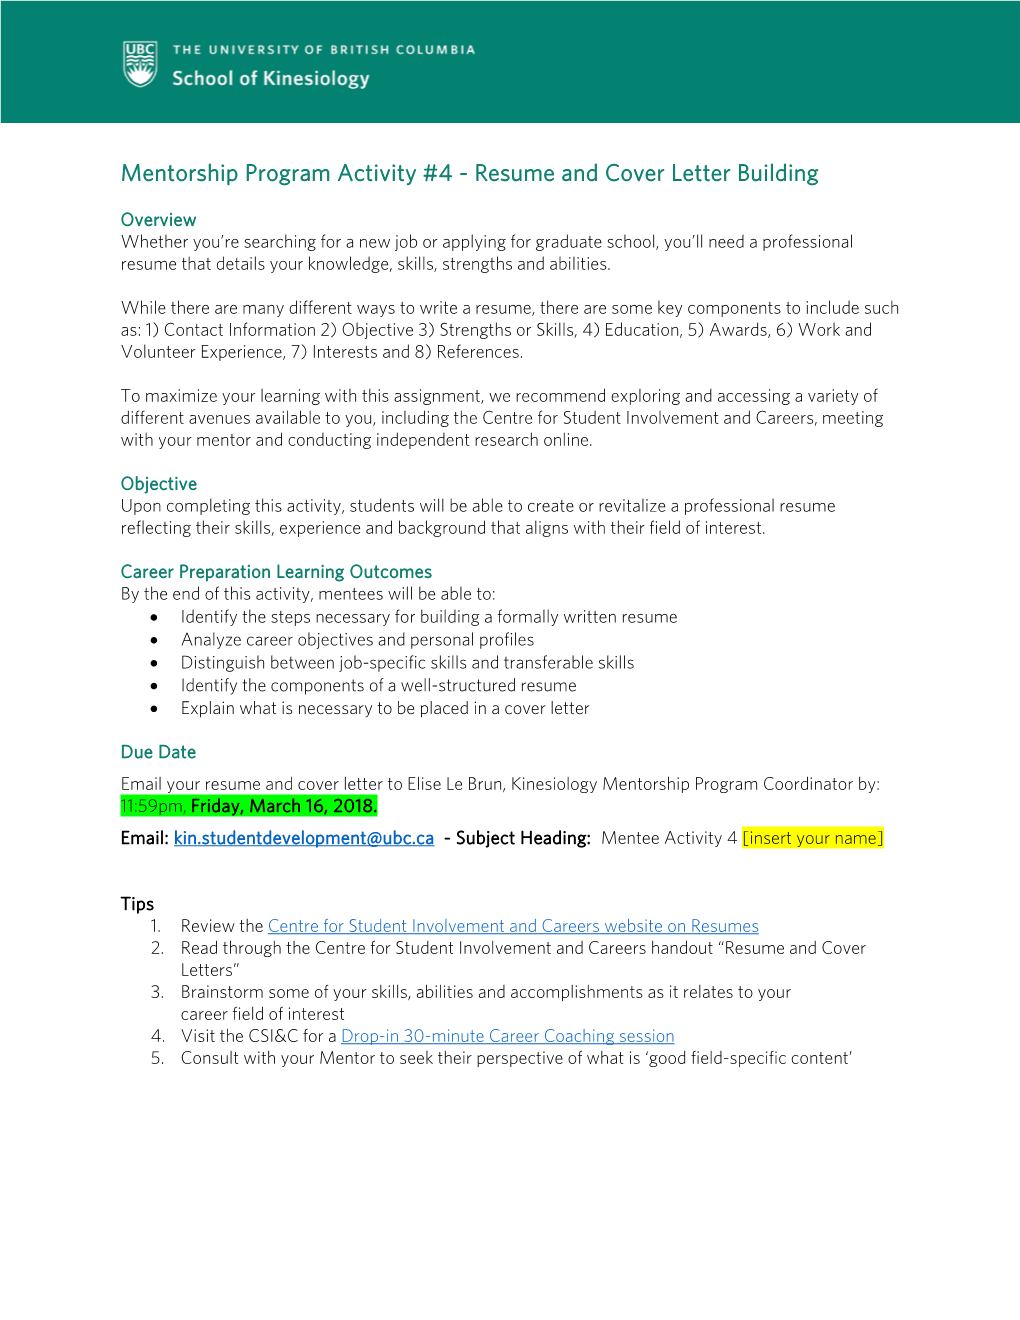 Mentorship Program Activity #4 - Resume and Cover Letter Building